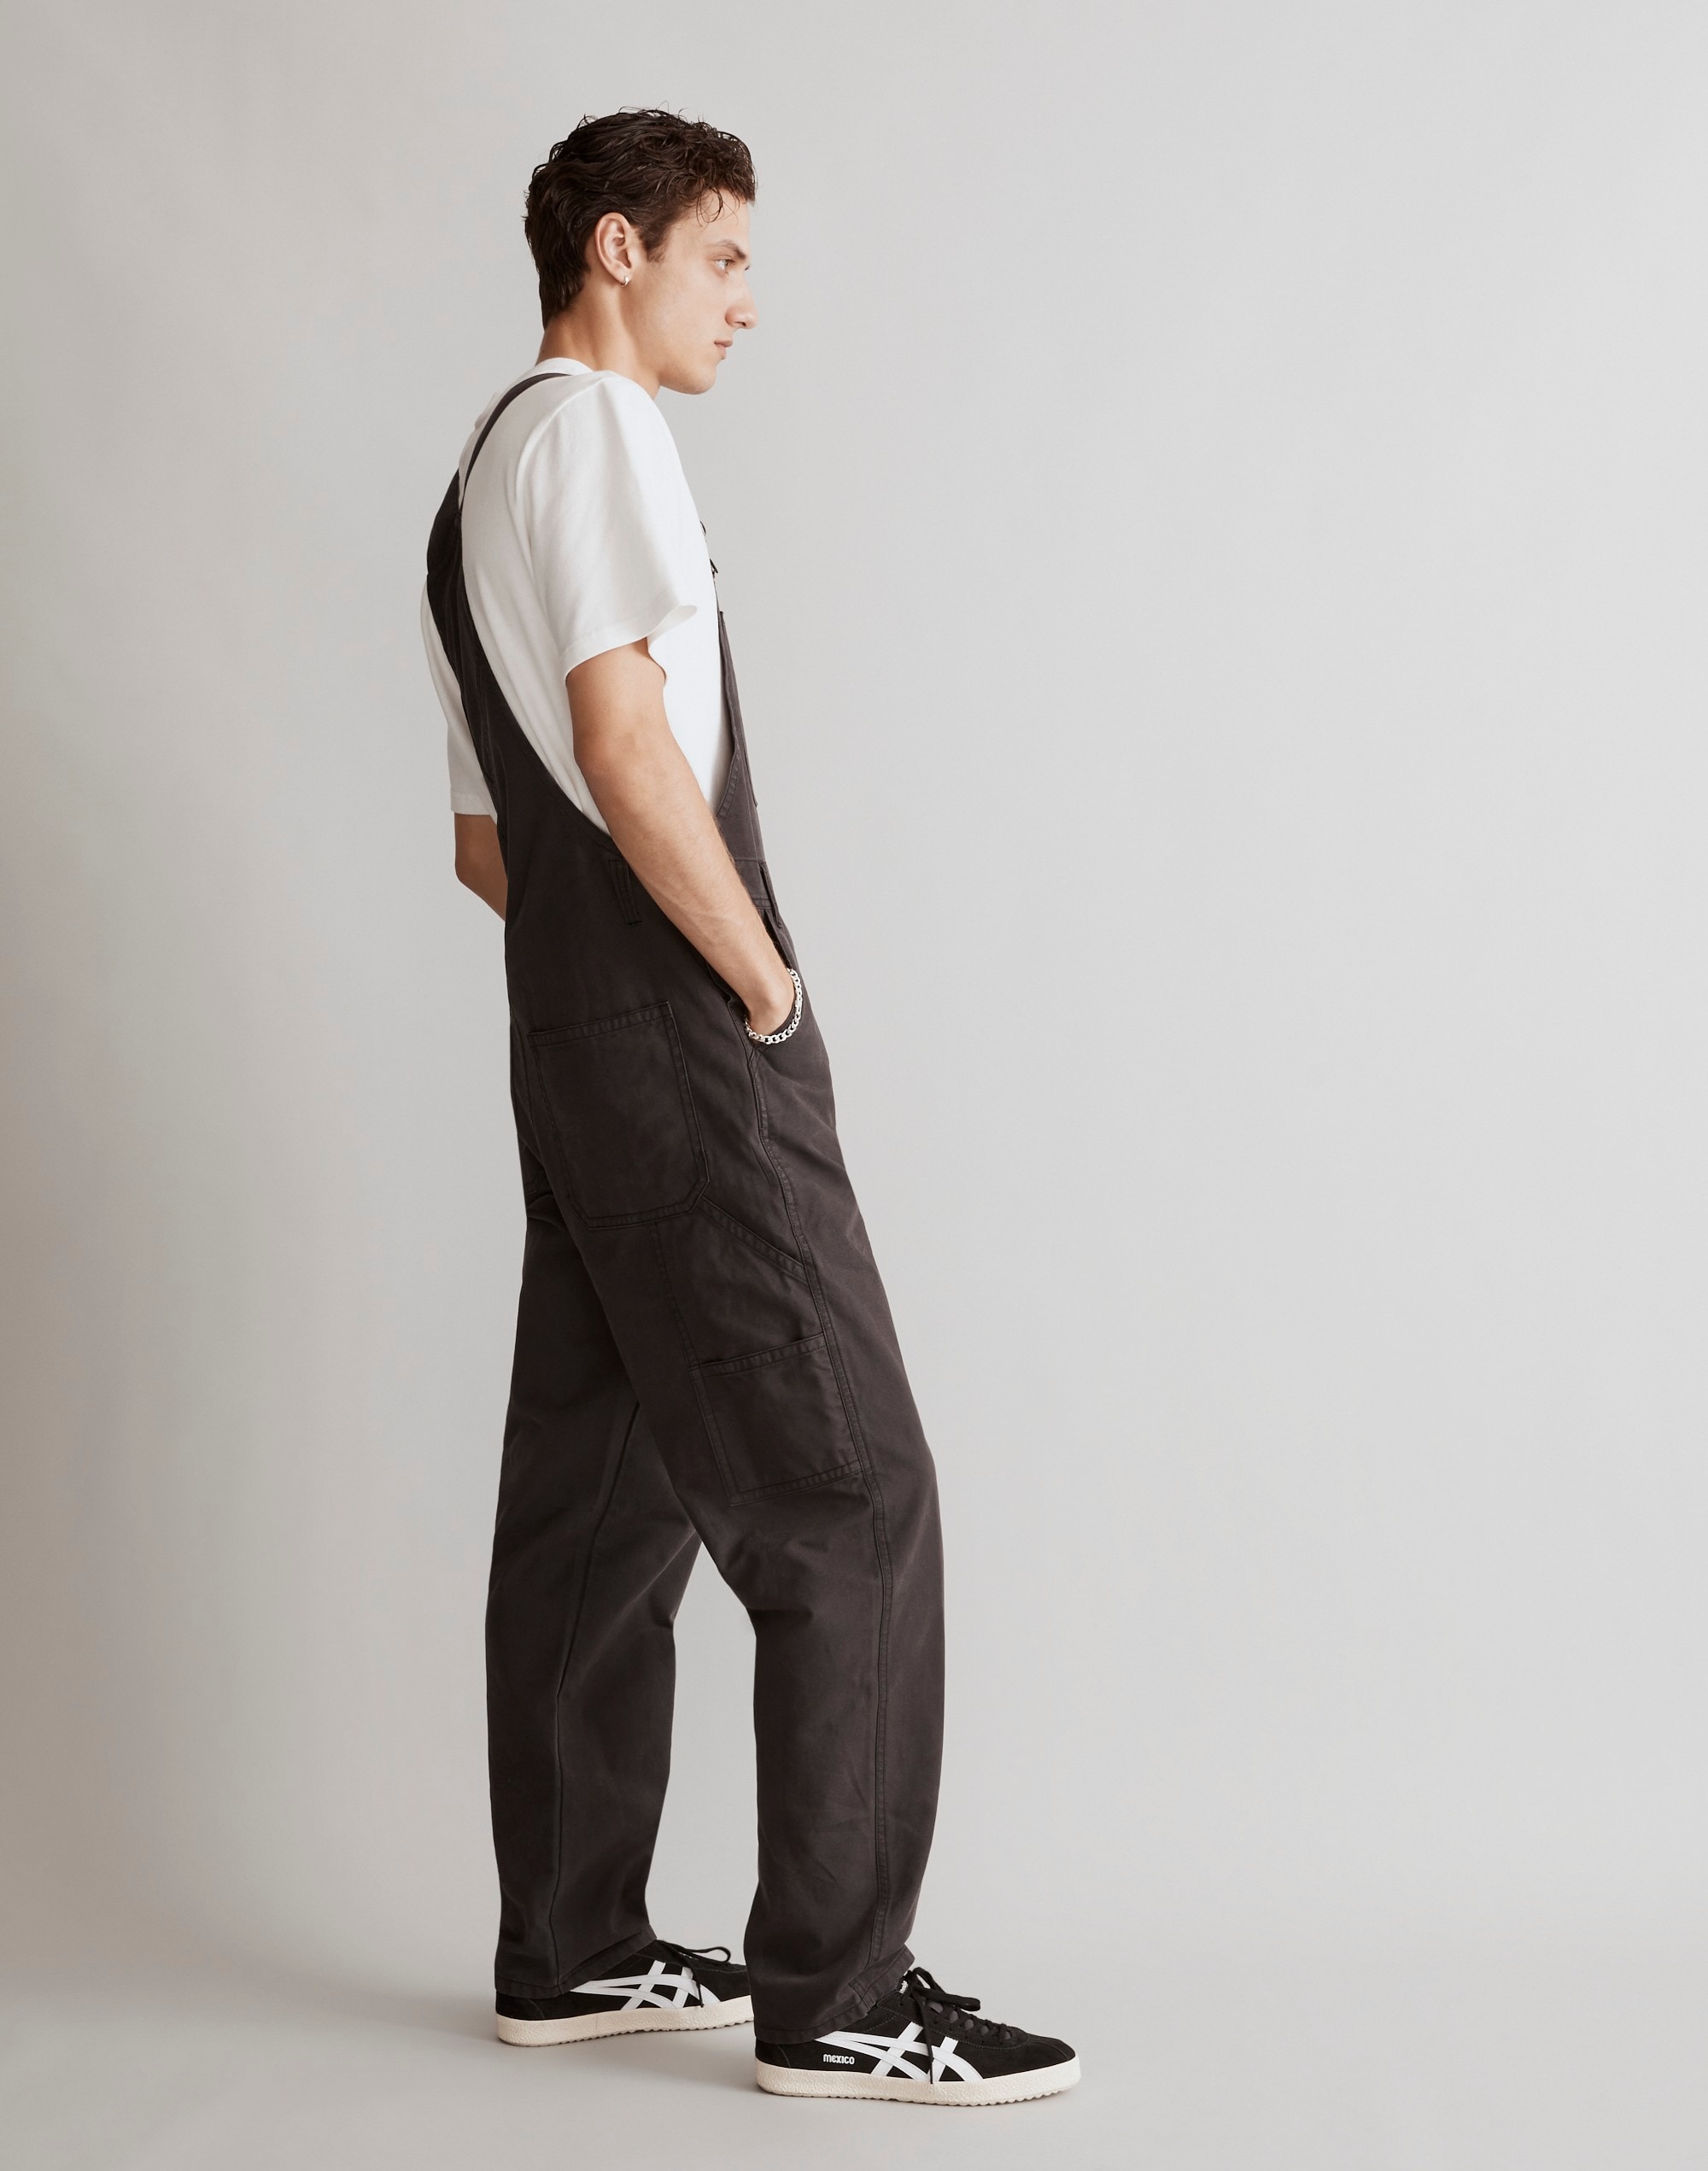 Garment-Dyed Canvas Overalls